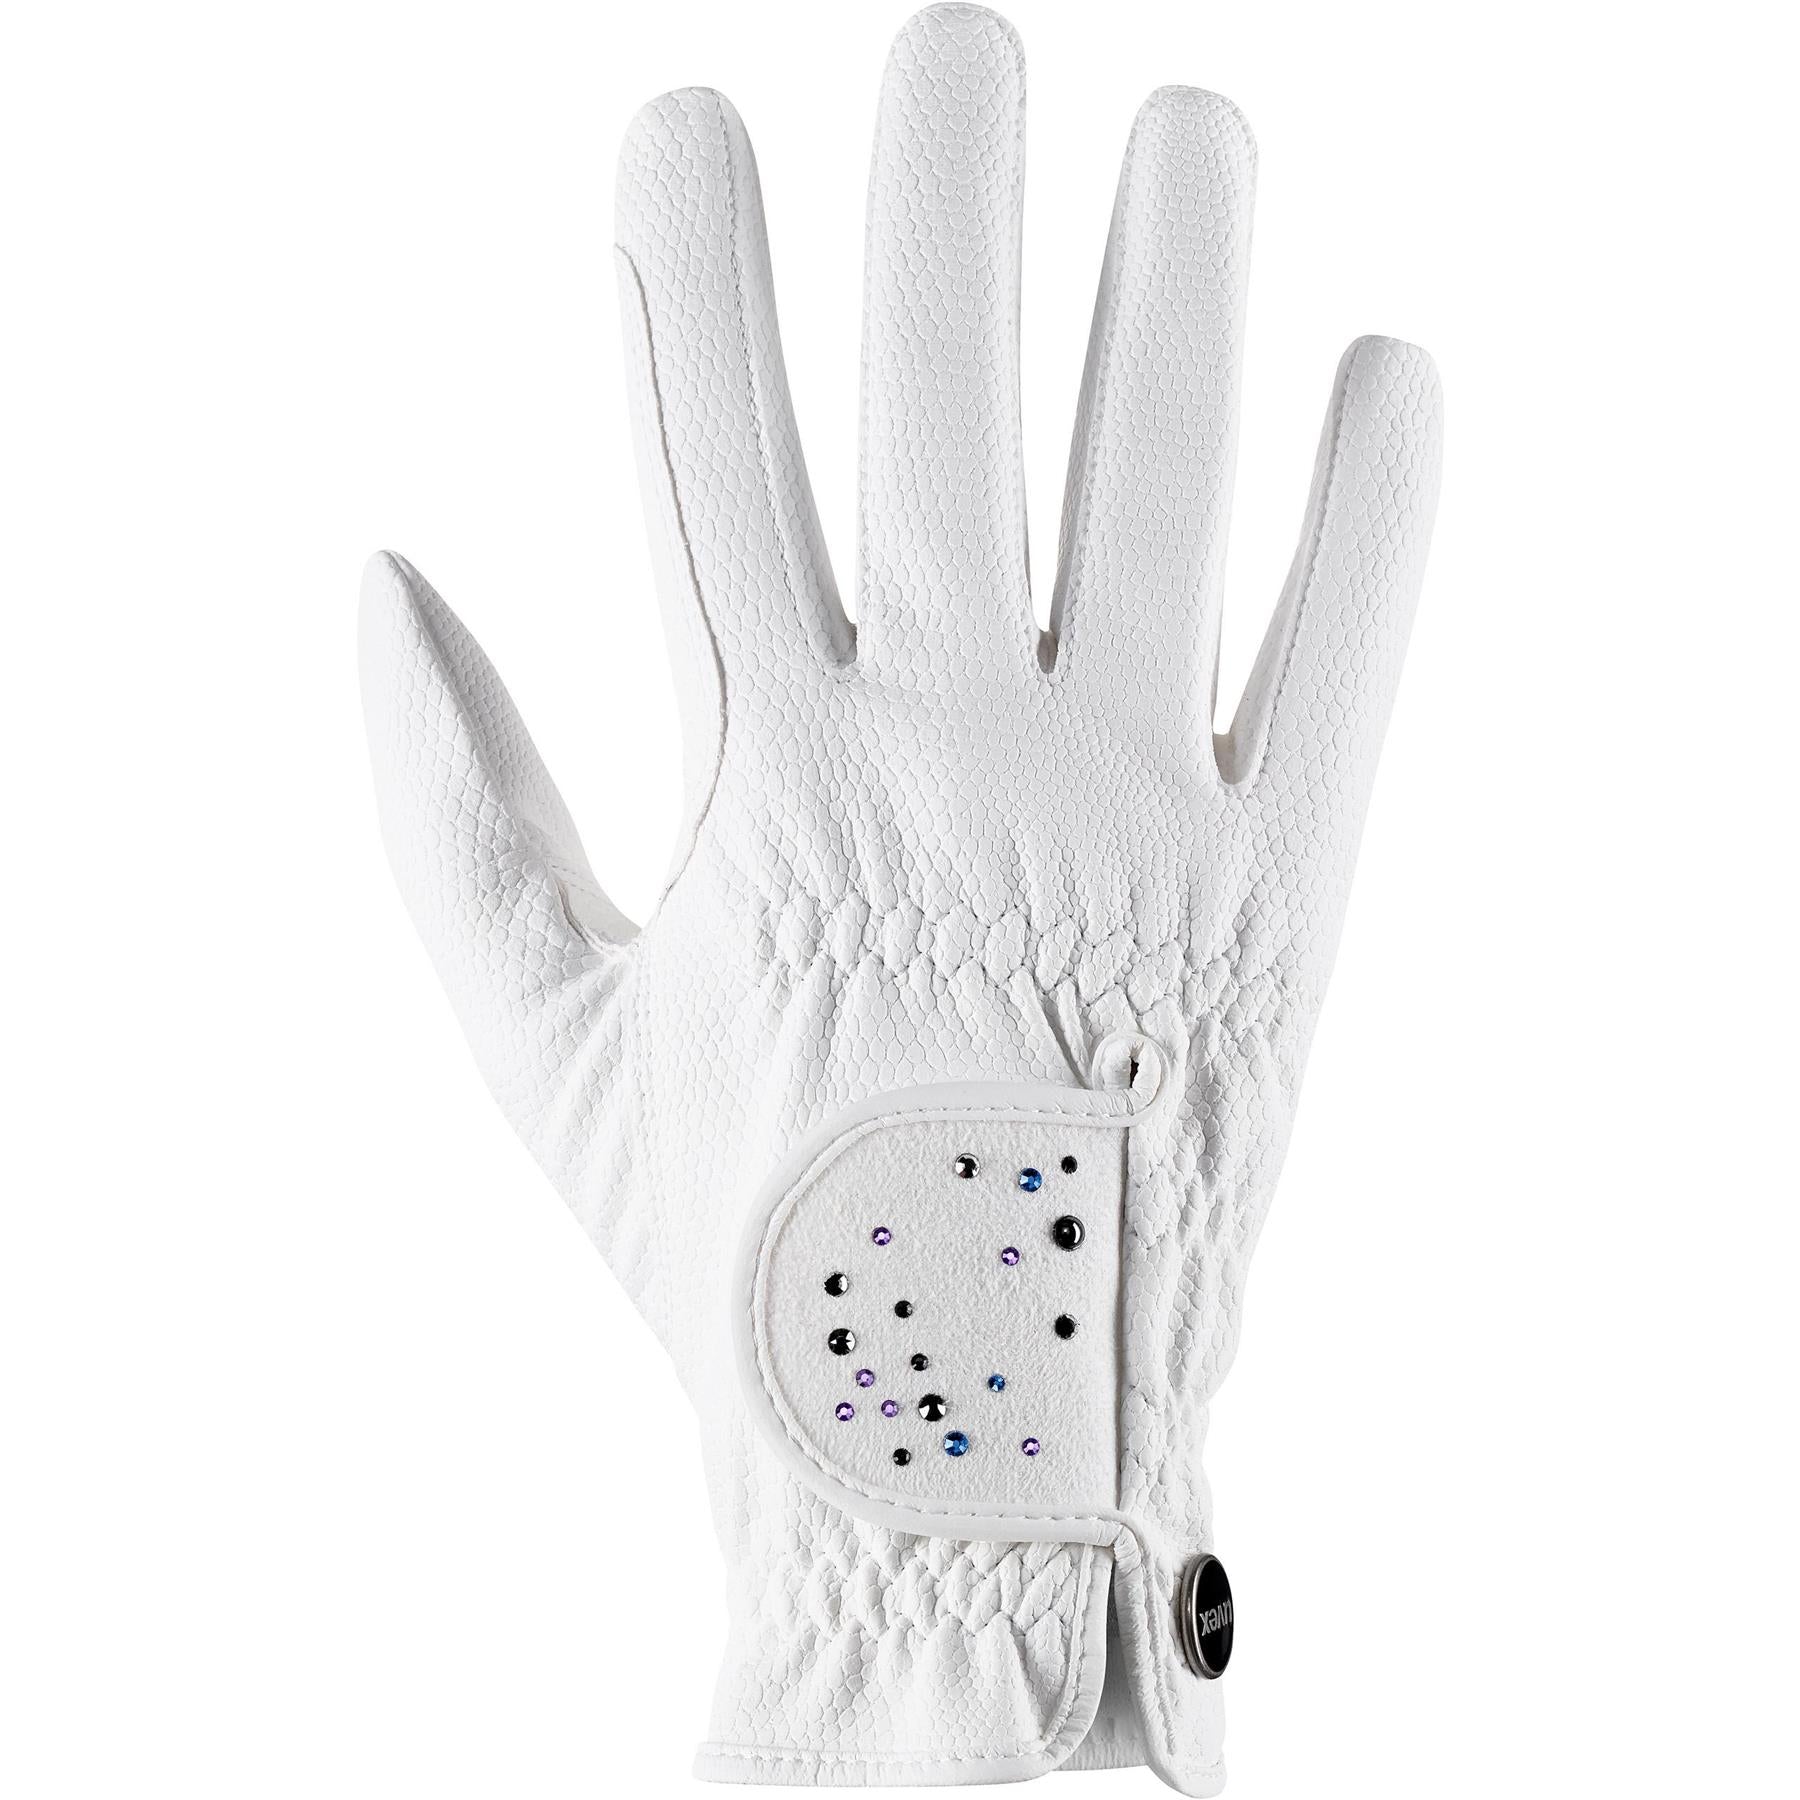 Uvex Sportstyle Diamond Horse Riding Gloves - Just Horse Riders